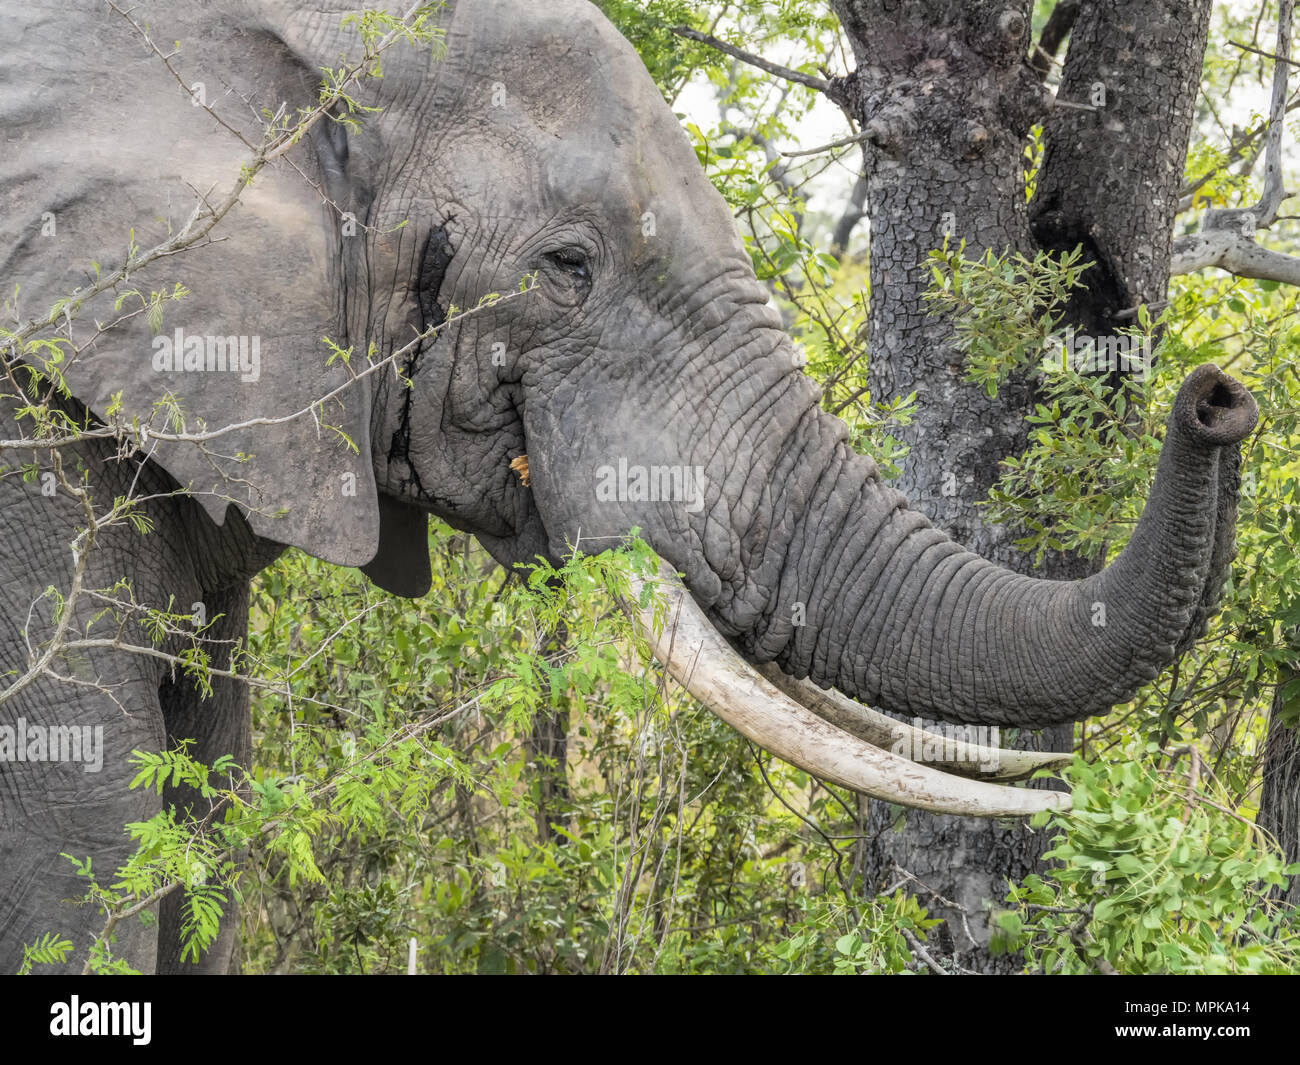 Bull African Elephant Loxodonta africana in musth in South Africa Stock Photo